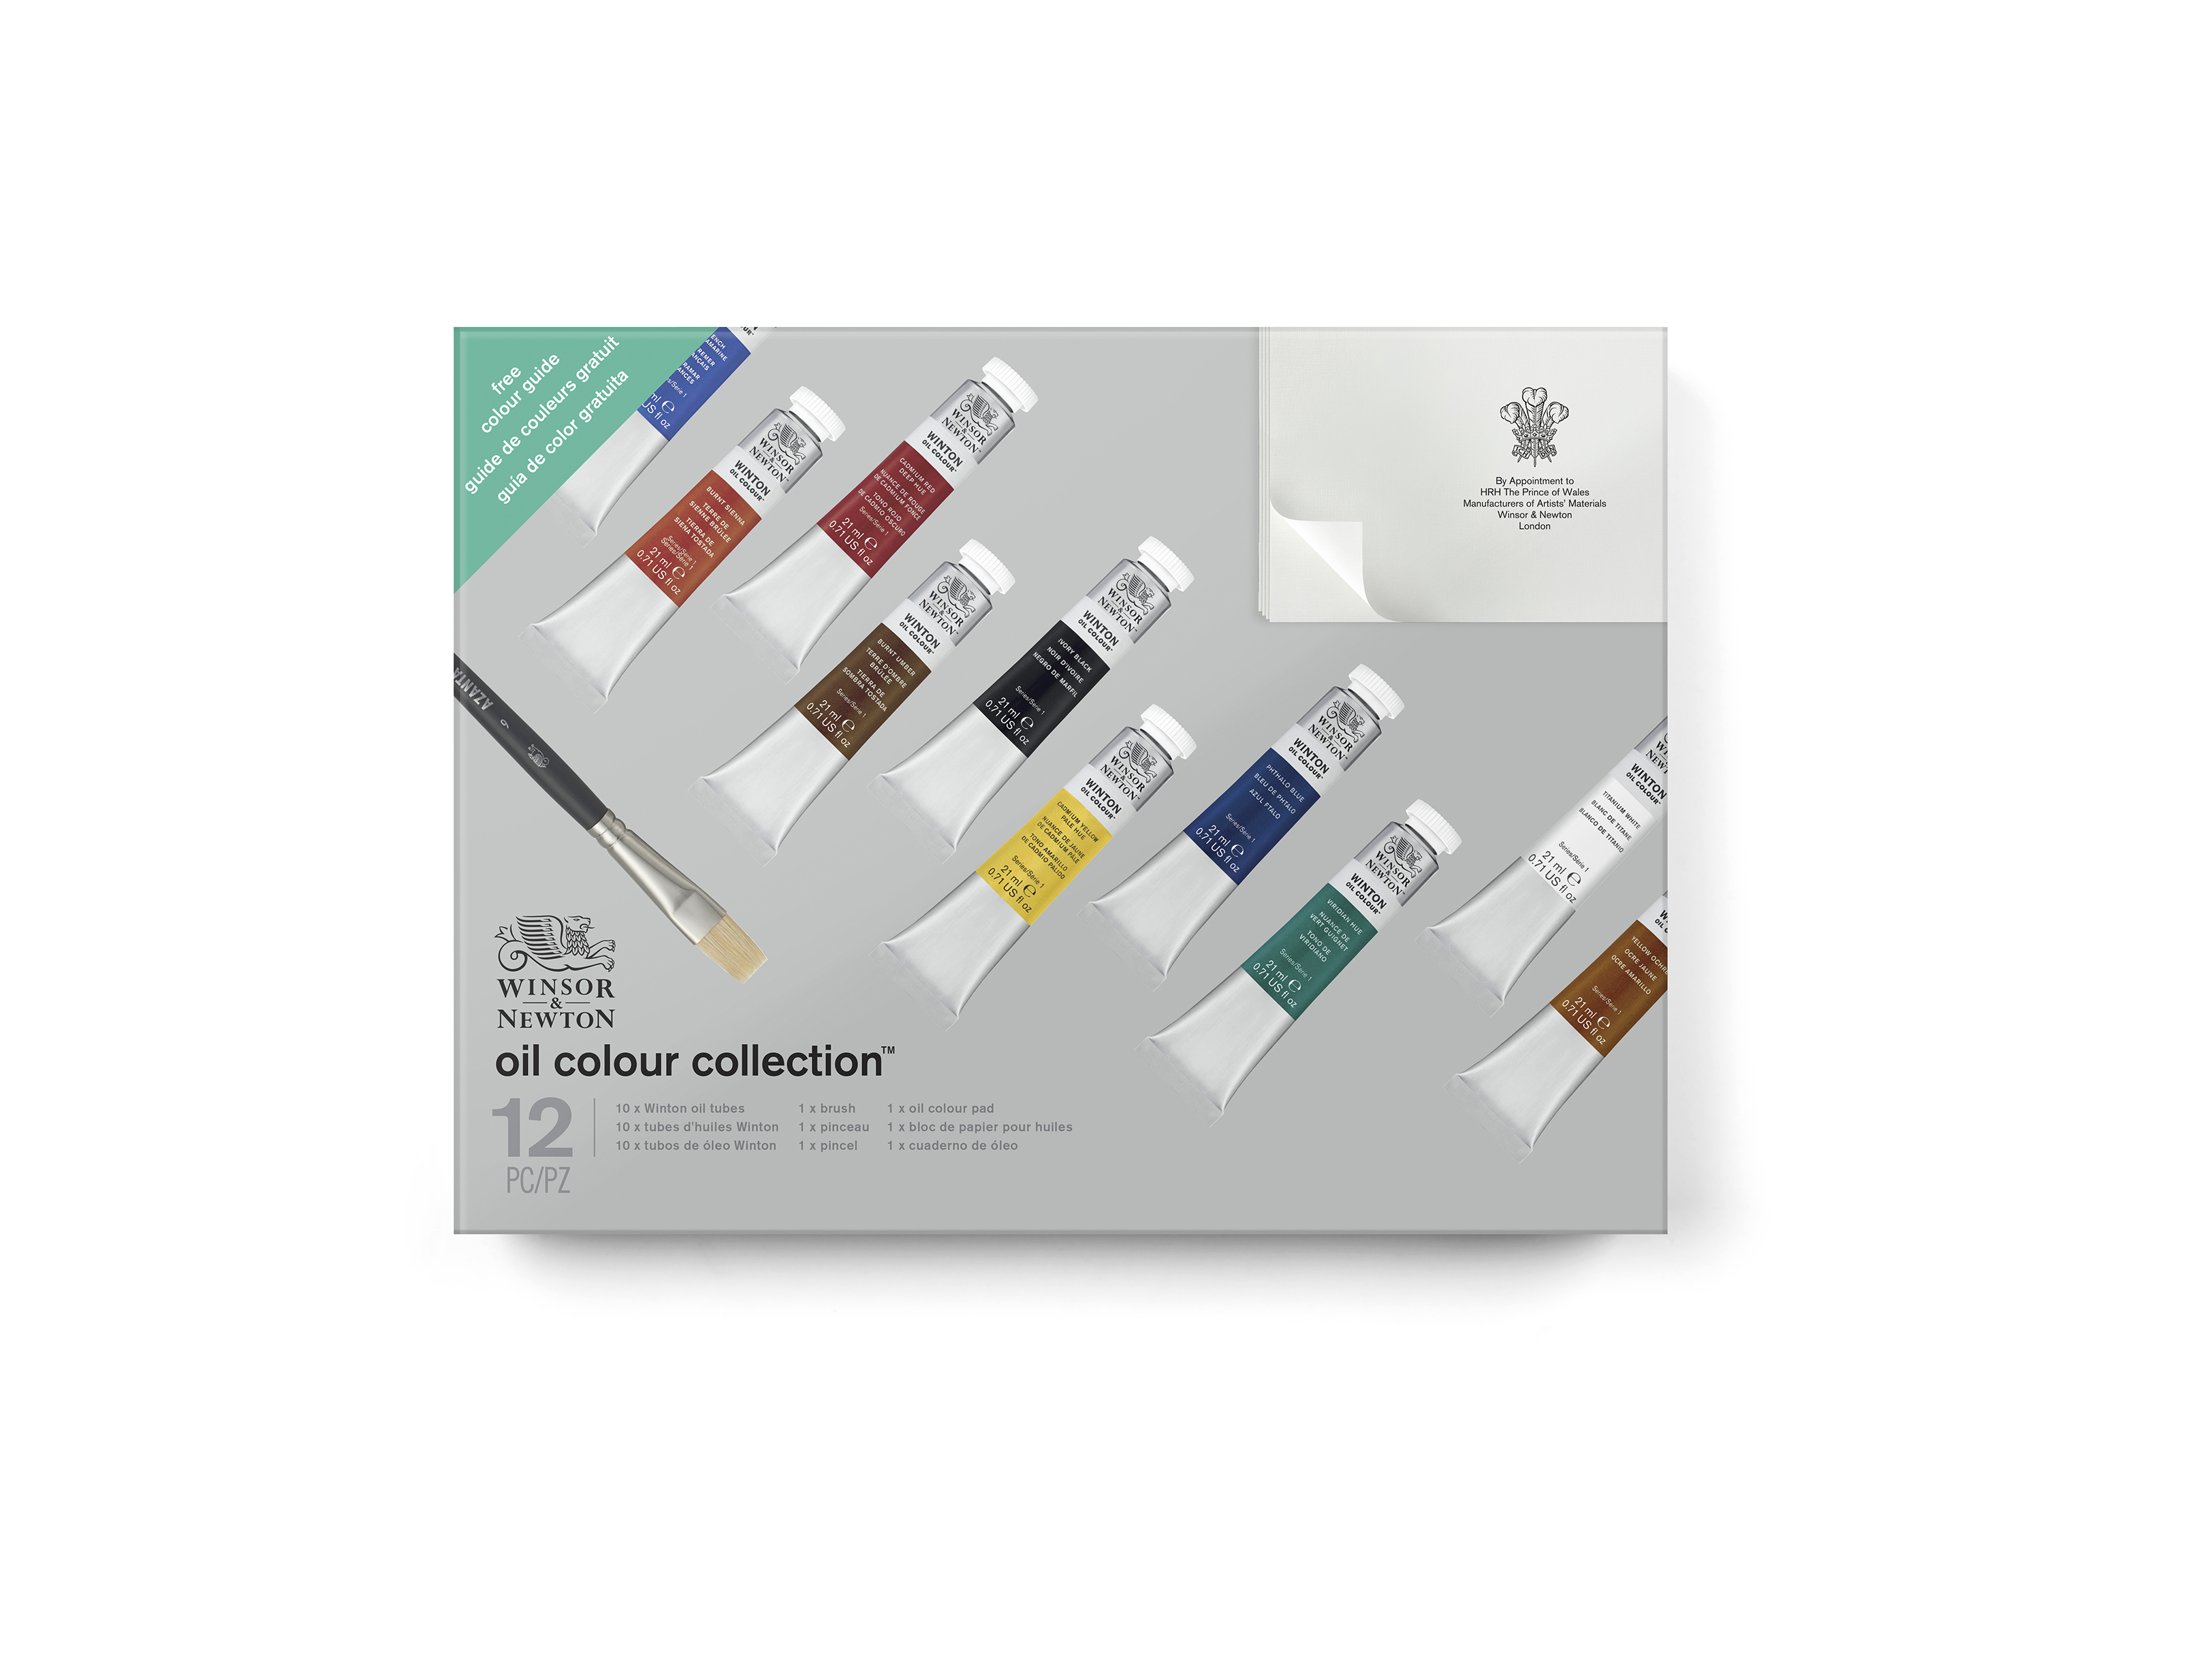 884955064771-WN GIFT 2018 OIL COLOUR COLLECTION 884955064771 LR..jpg